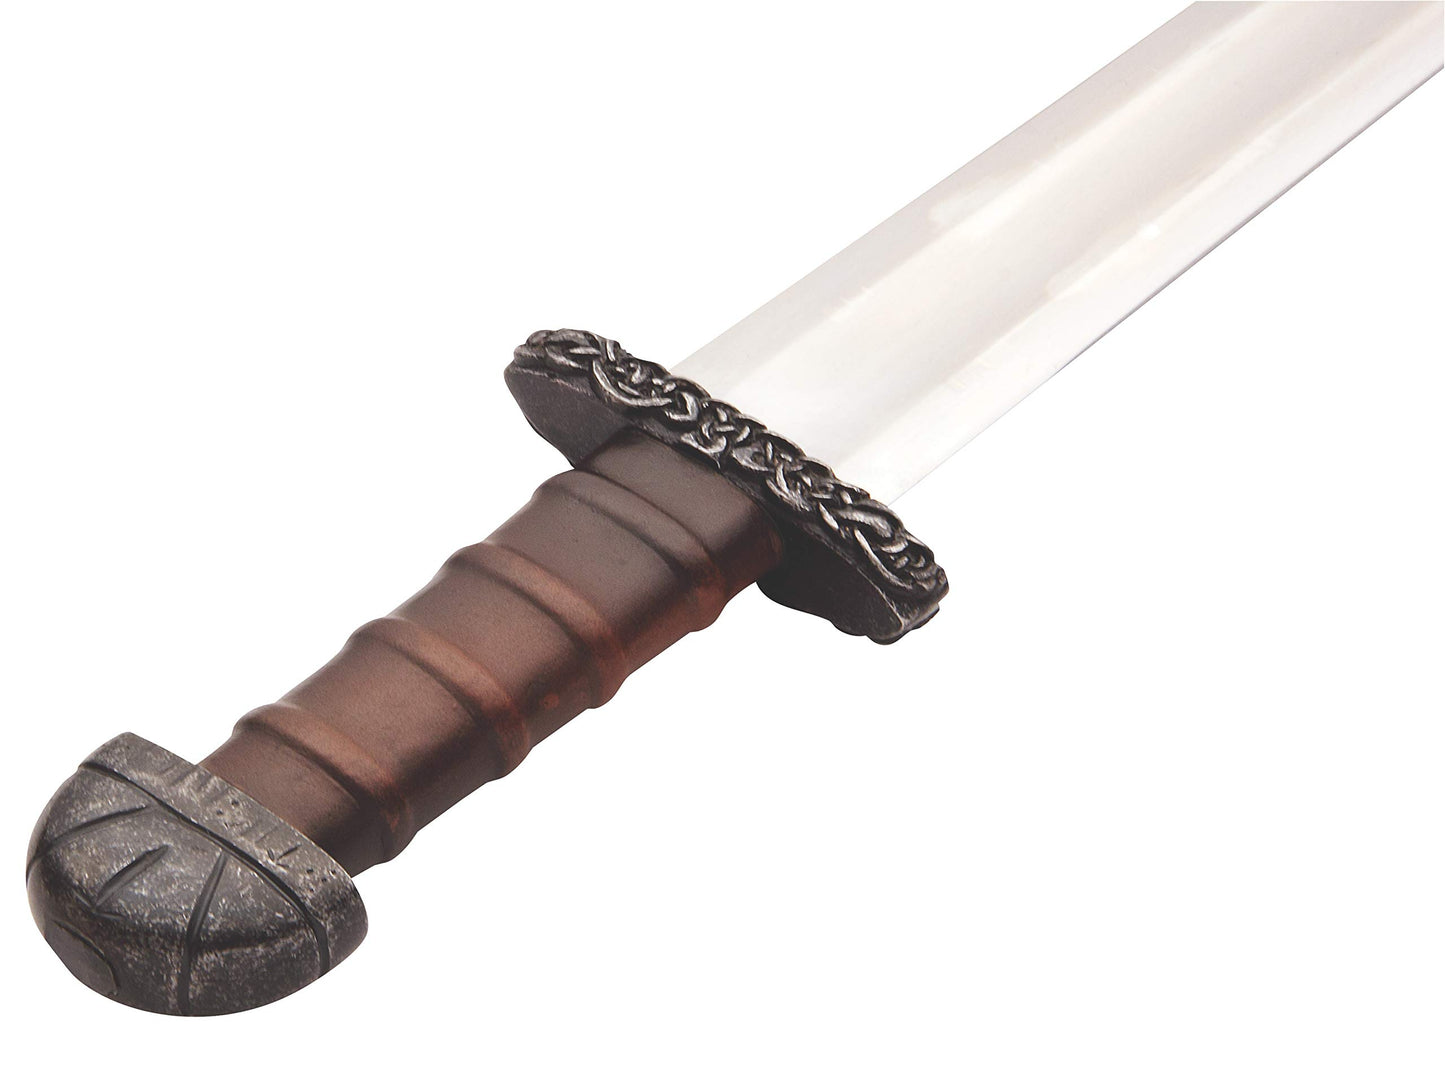 Steelcrafts Hand-Forged Ashdown Viking Sword